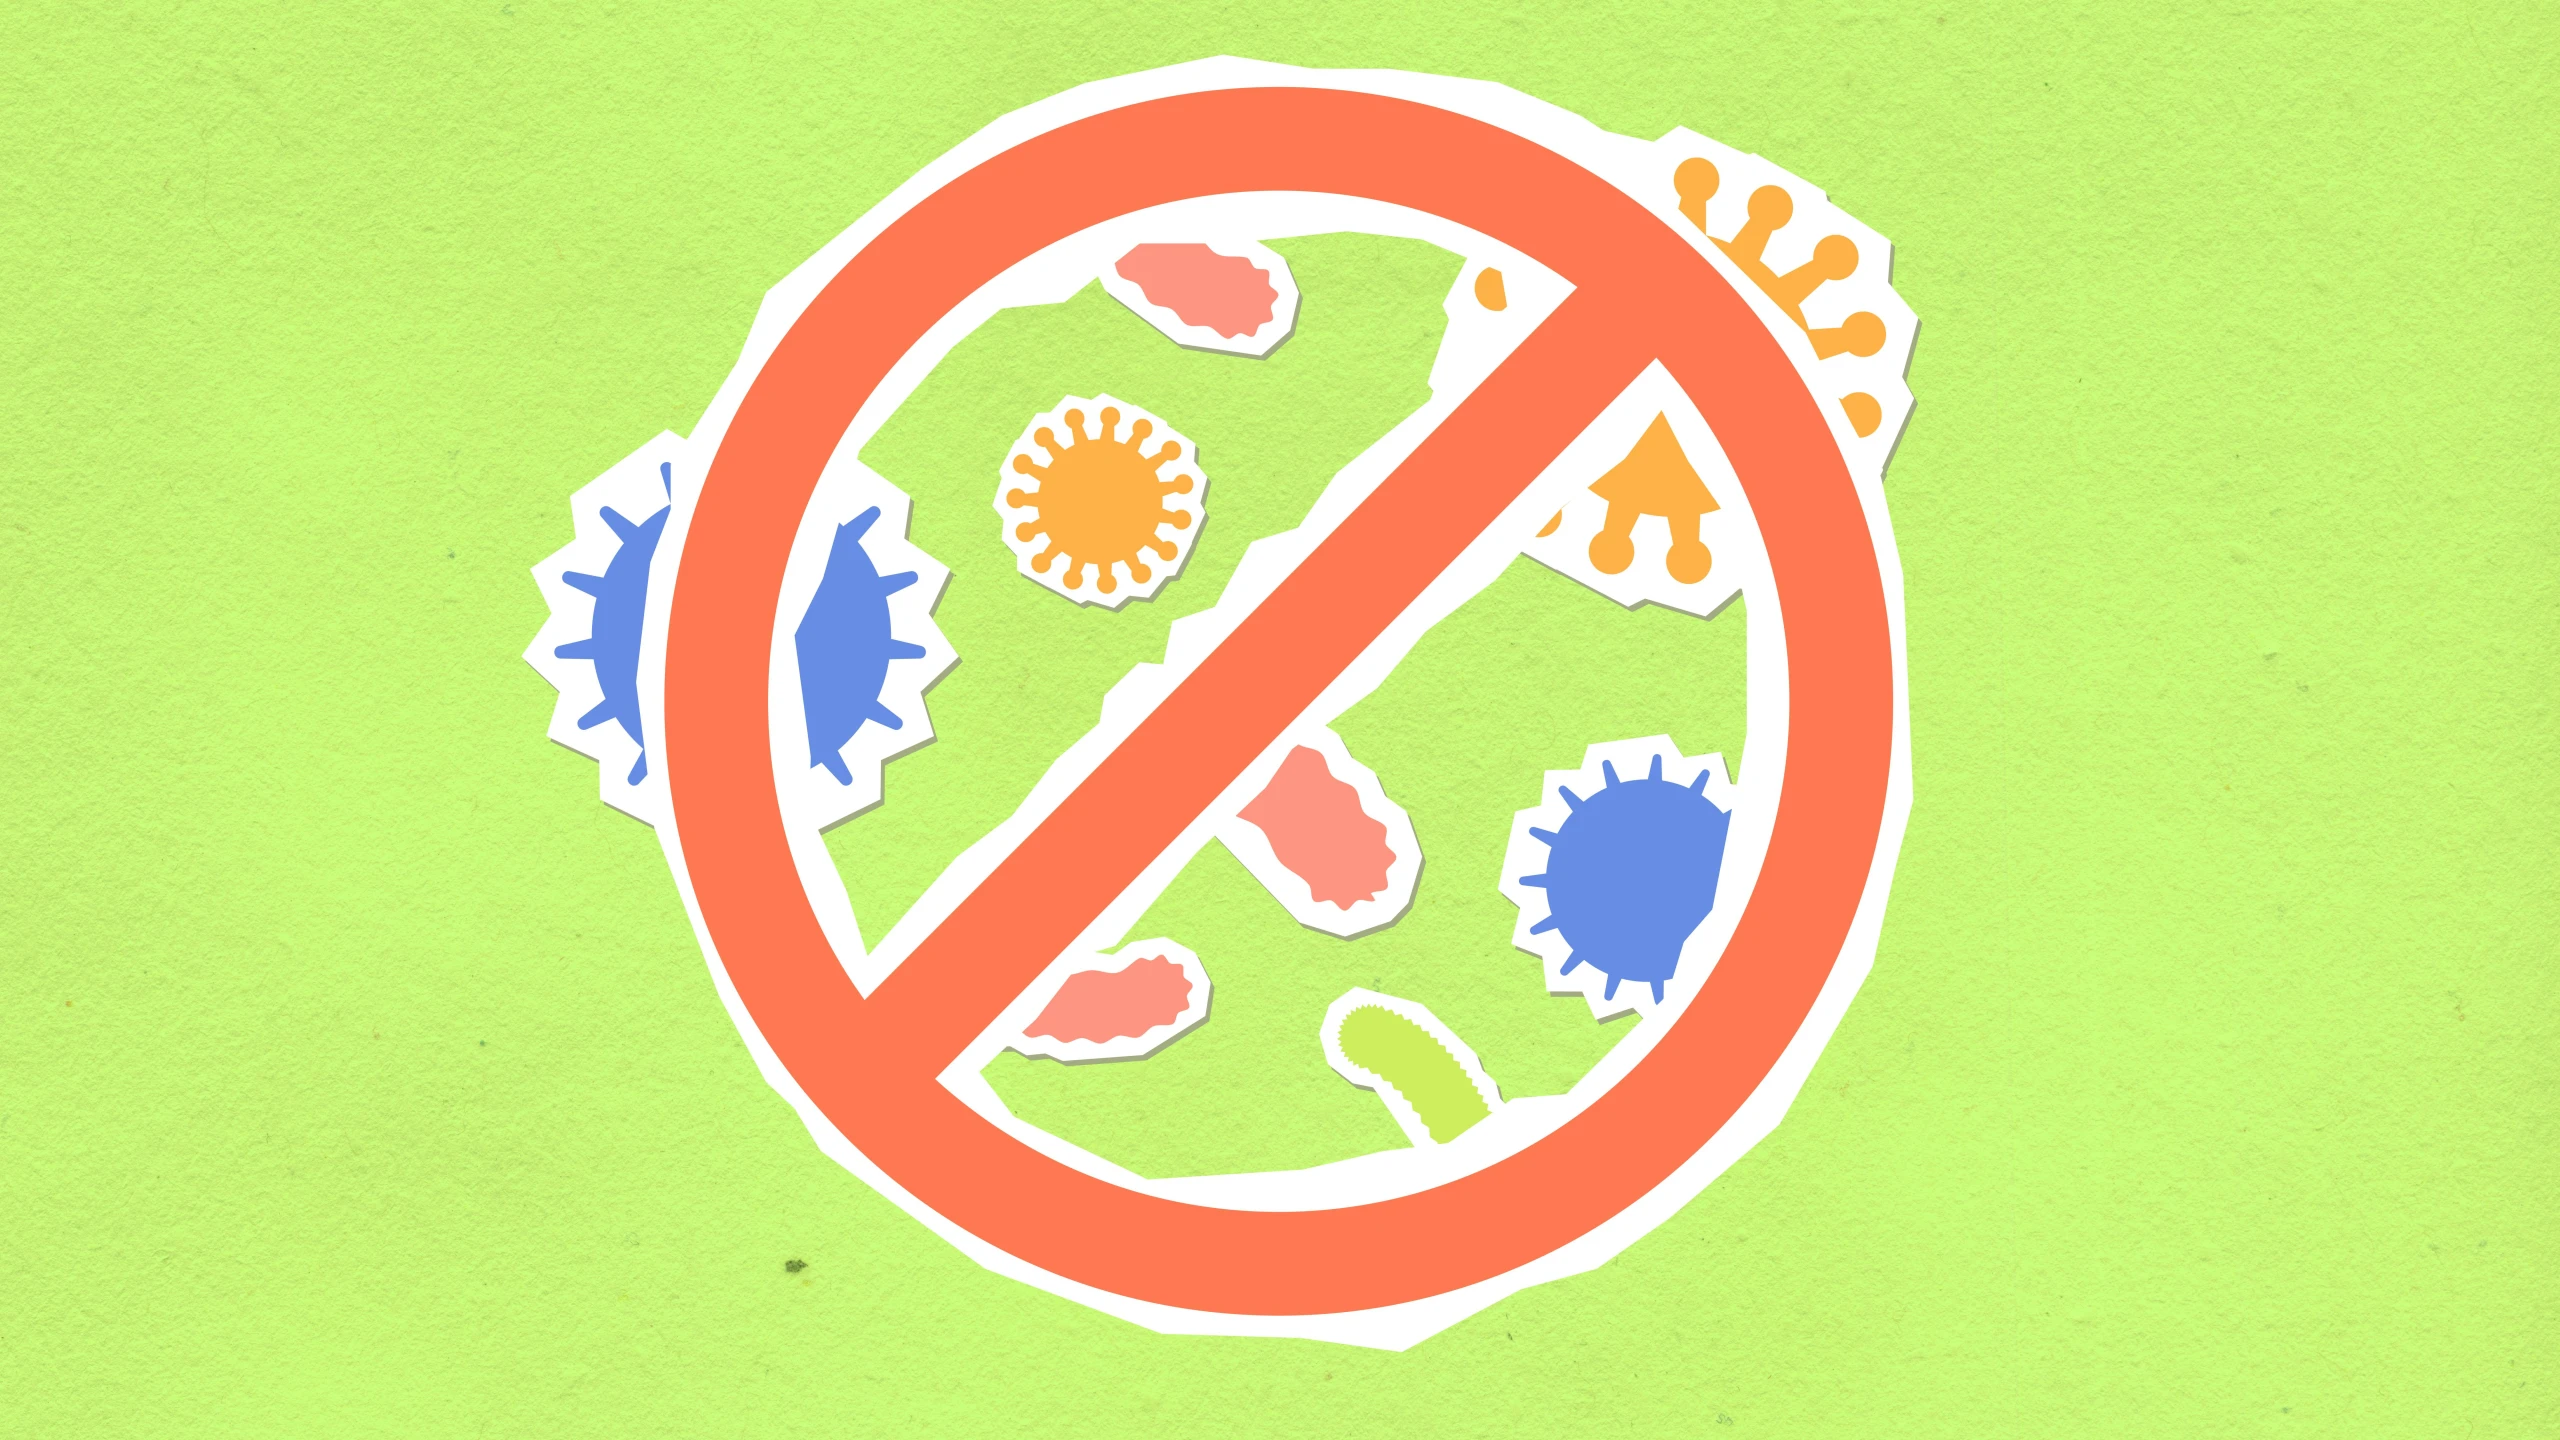 a close up of a sign on a green background, an illustration of, pexels, antipodeans, micro - organisms, no helmets, no mask, circular